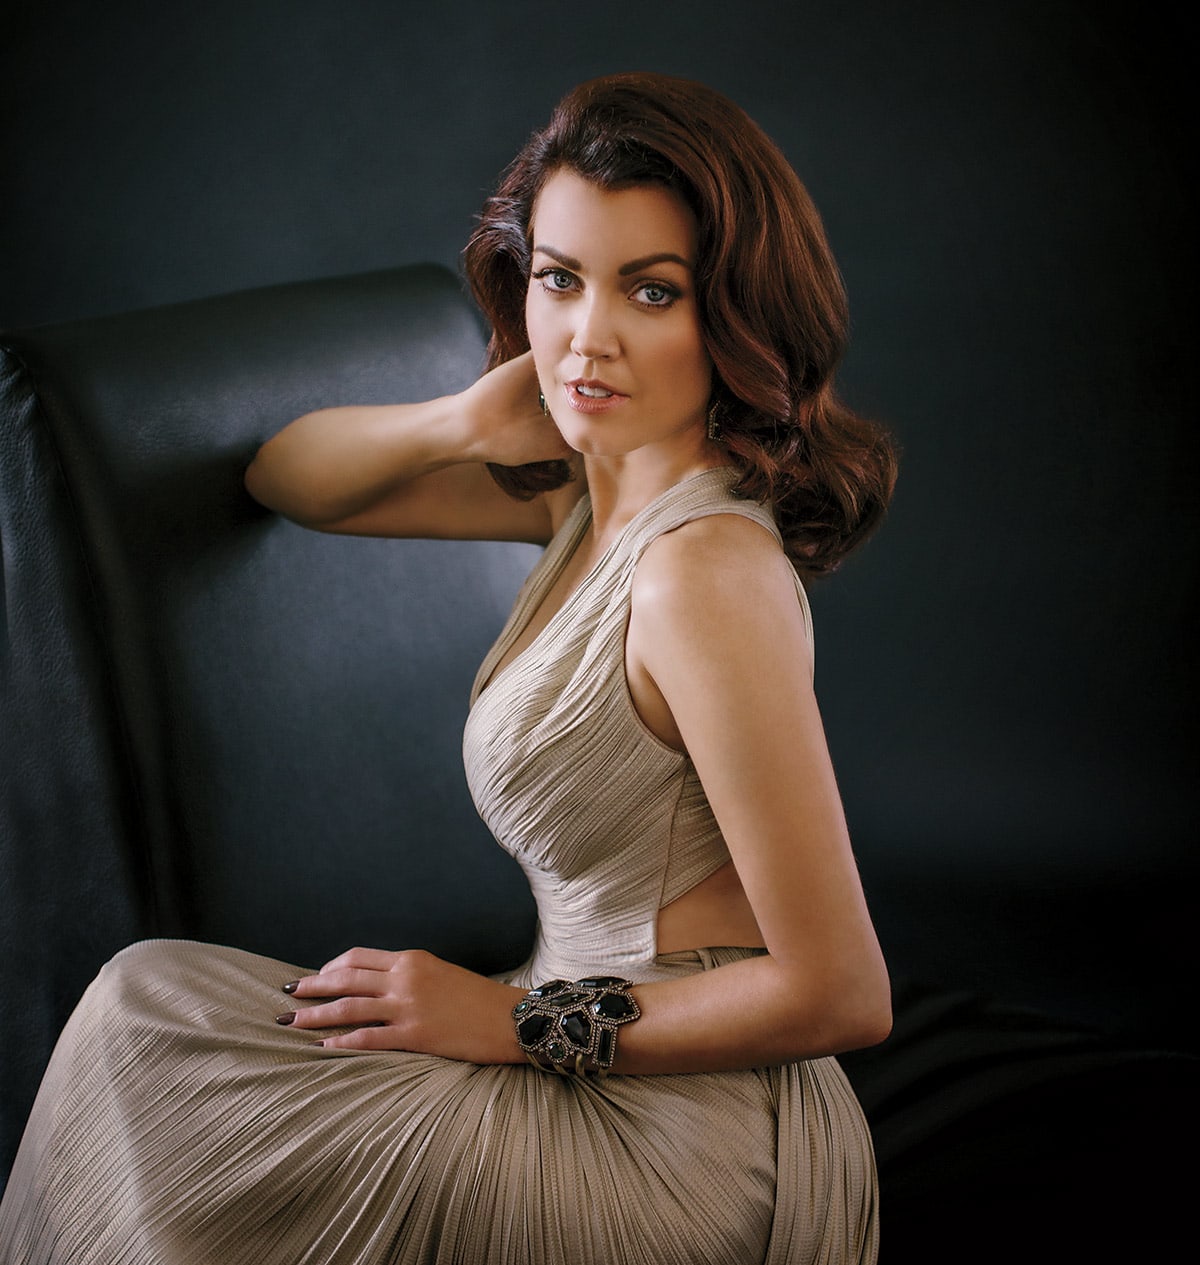 Bellamy young images